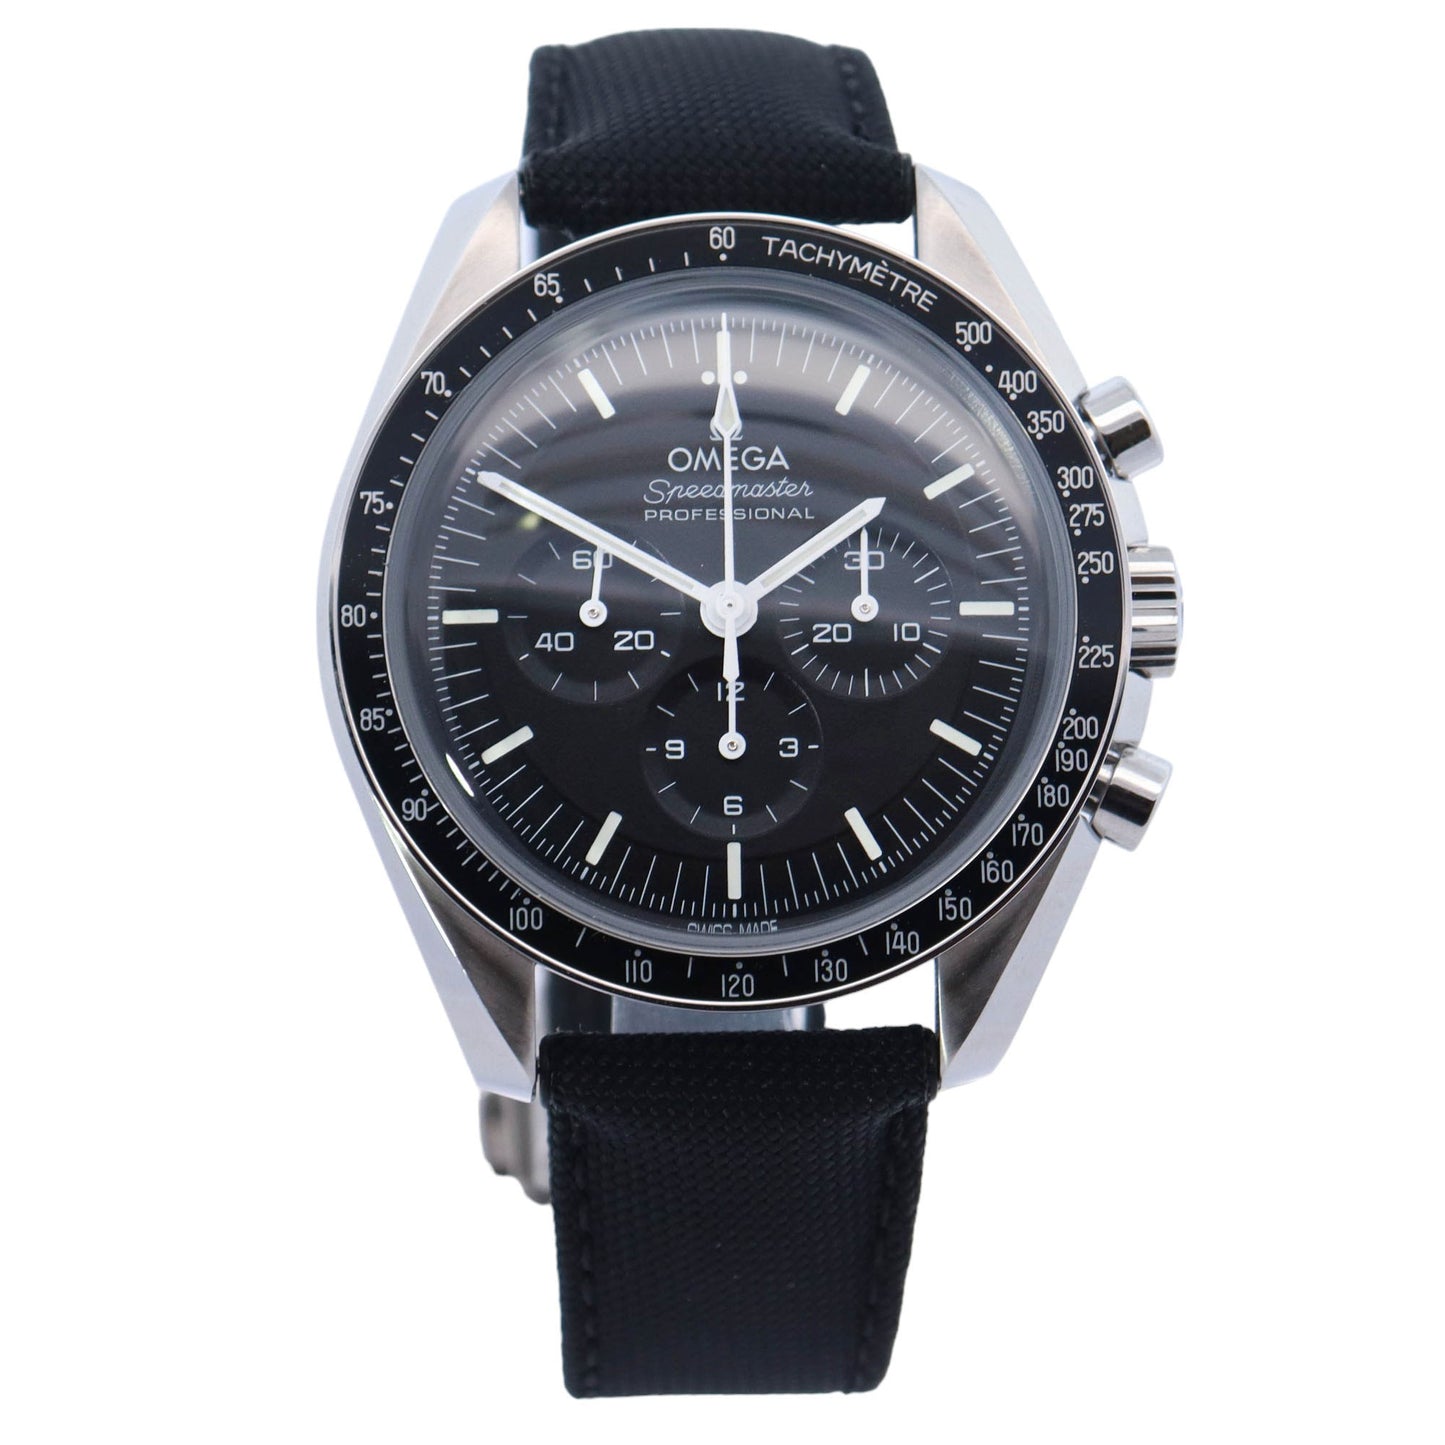 Omega Speedmaster Professional Moonswatch Stainless Steel 42mm Black Chronograph Dial Watch Reference# 310.32.42.50.01.001 - Happy Jewelers Fine Jewelry Lifetime Warranty